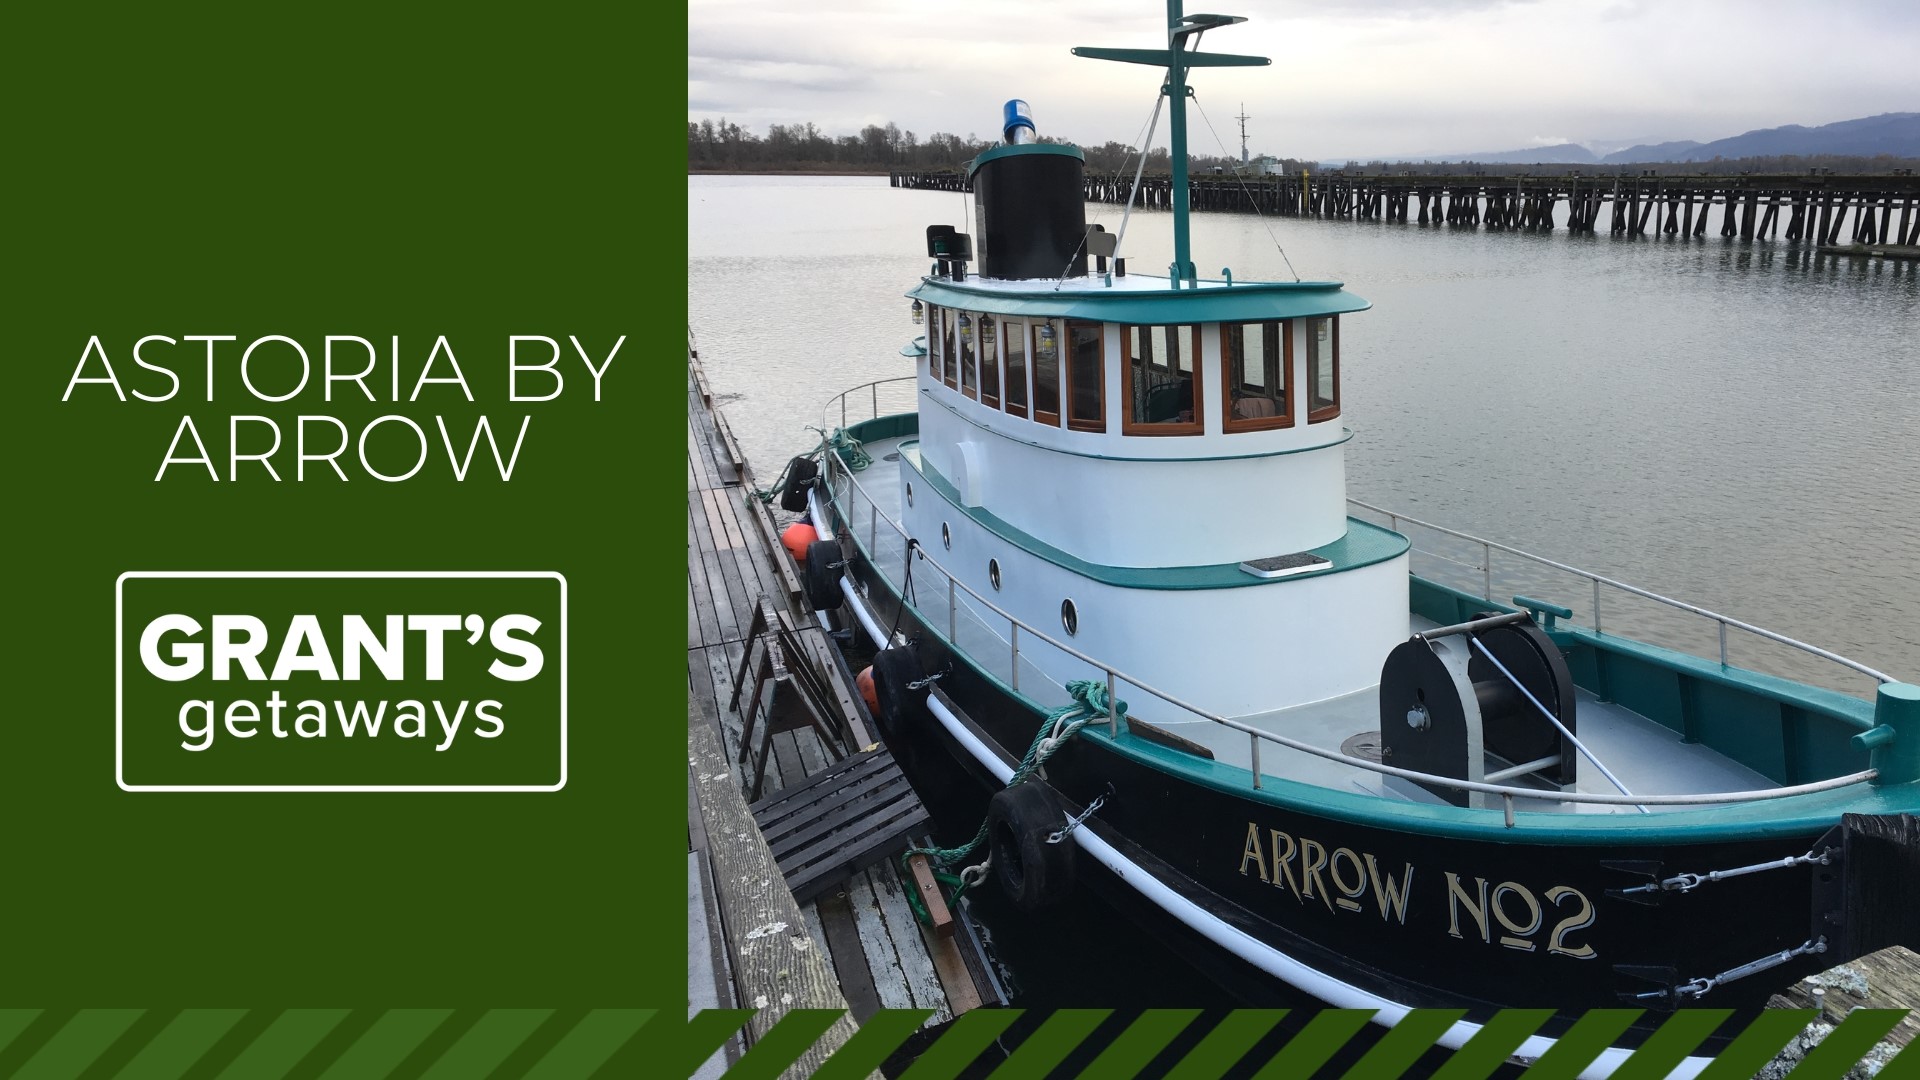 Once the river pilot boat that led mariners upriver, the Arrow now serves sightseers who want to get the Astoria experience while out on the Columbia.